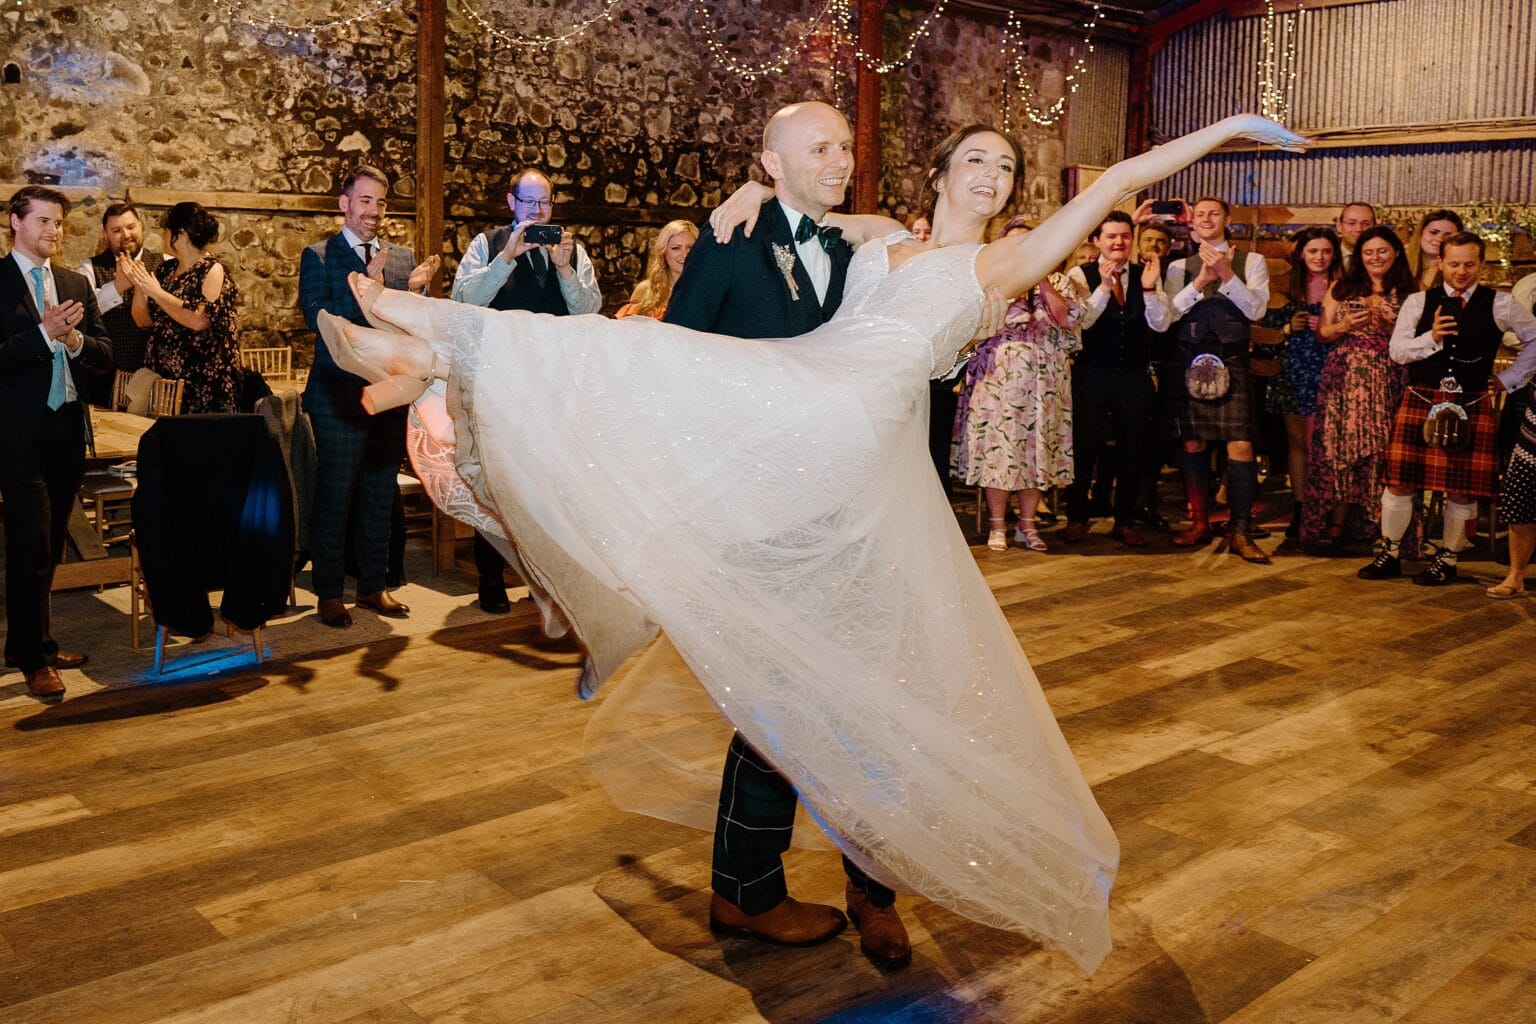 the groom lifts the bride during their first dance at their barn wedding venue as guests look on and applaud beneath festoon lighting